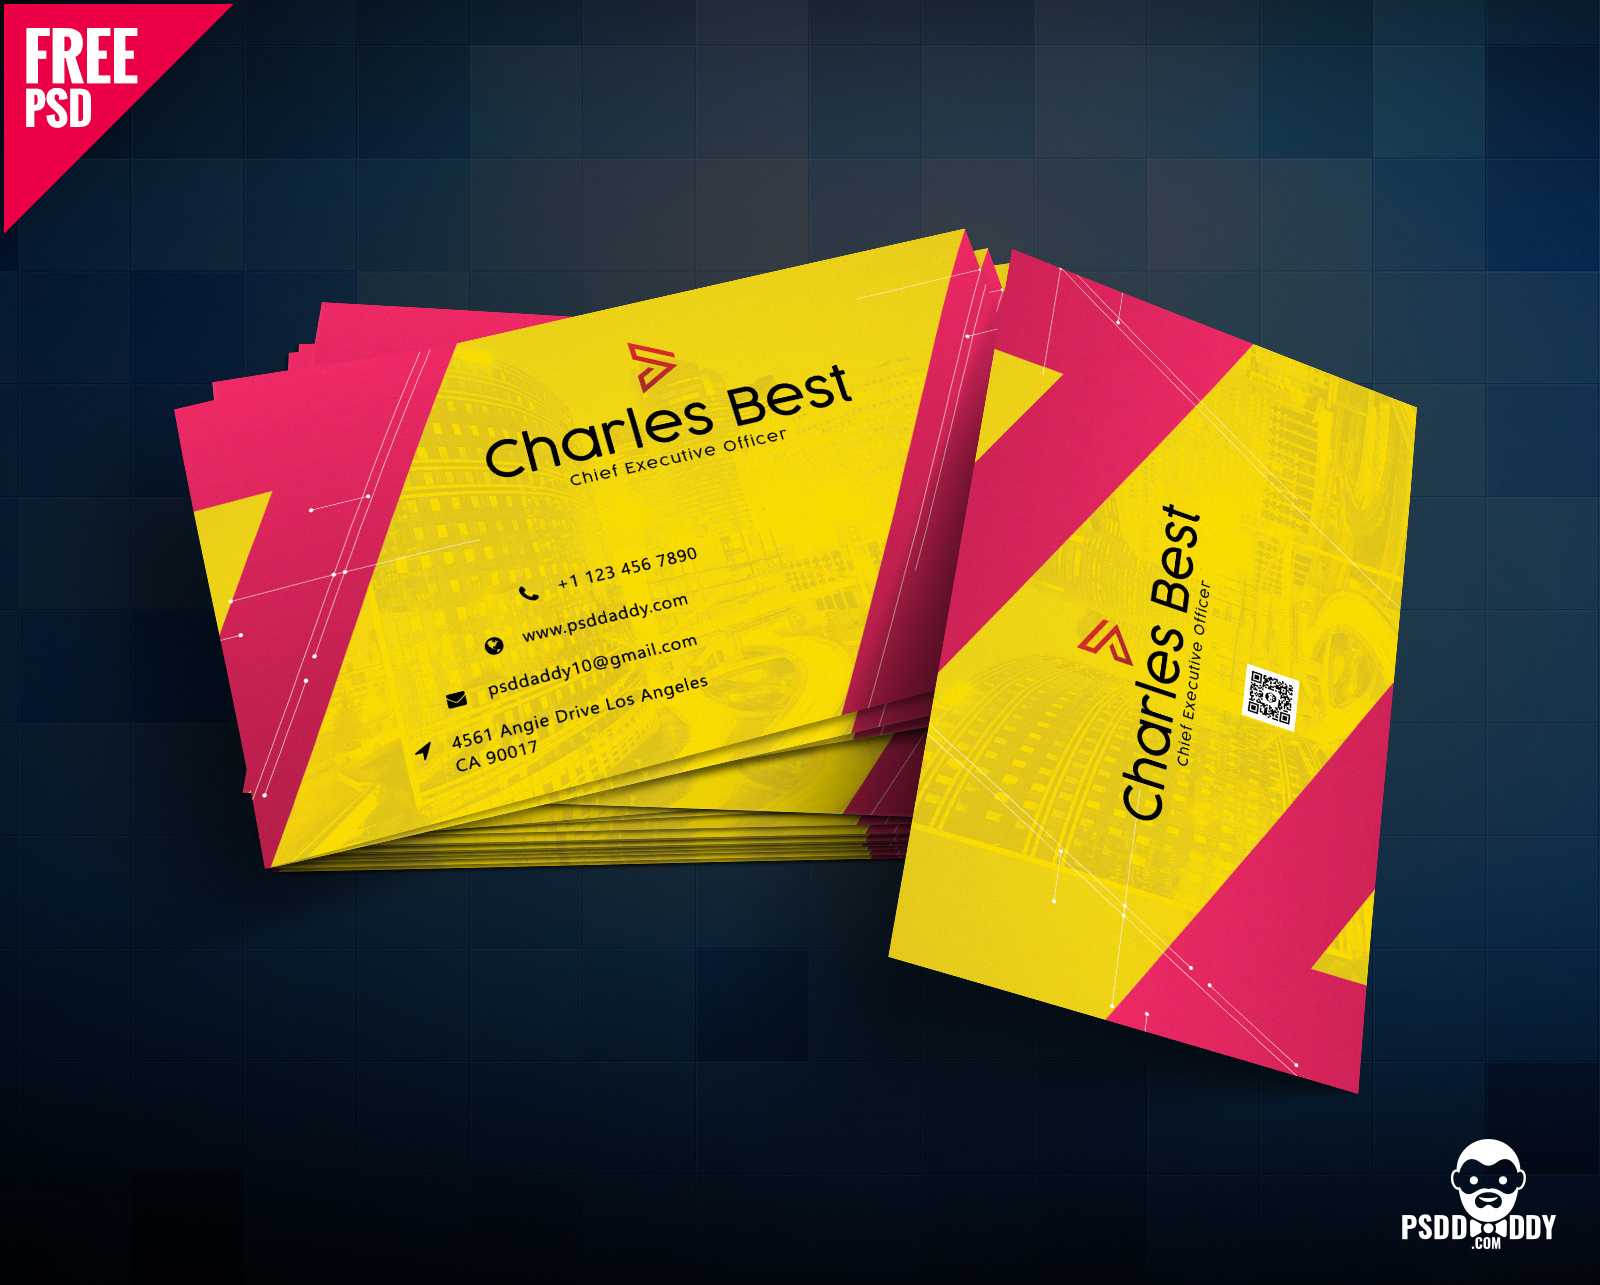 Download] Creative Business Card Free Psd | Psddaddy Intended For Creative Business Card Templates Psd